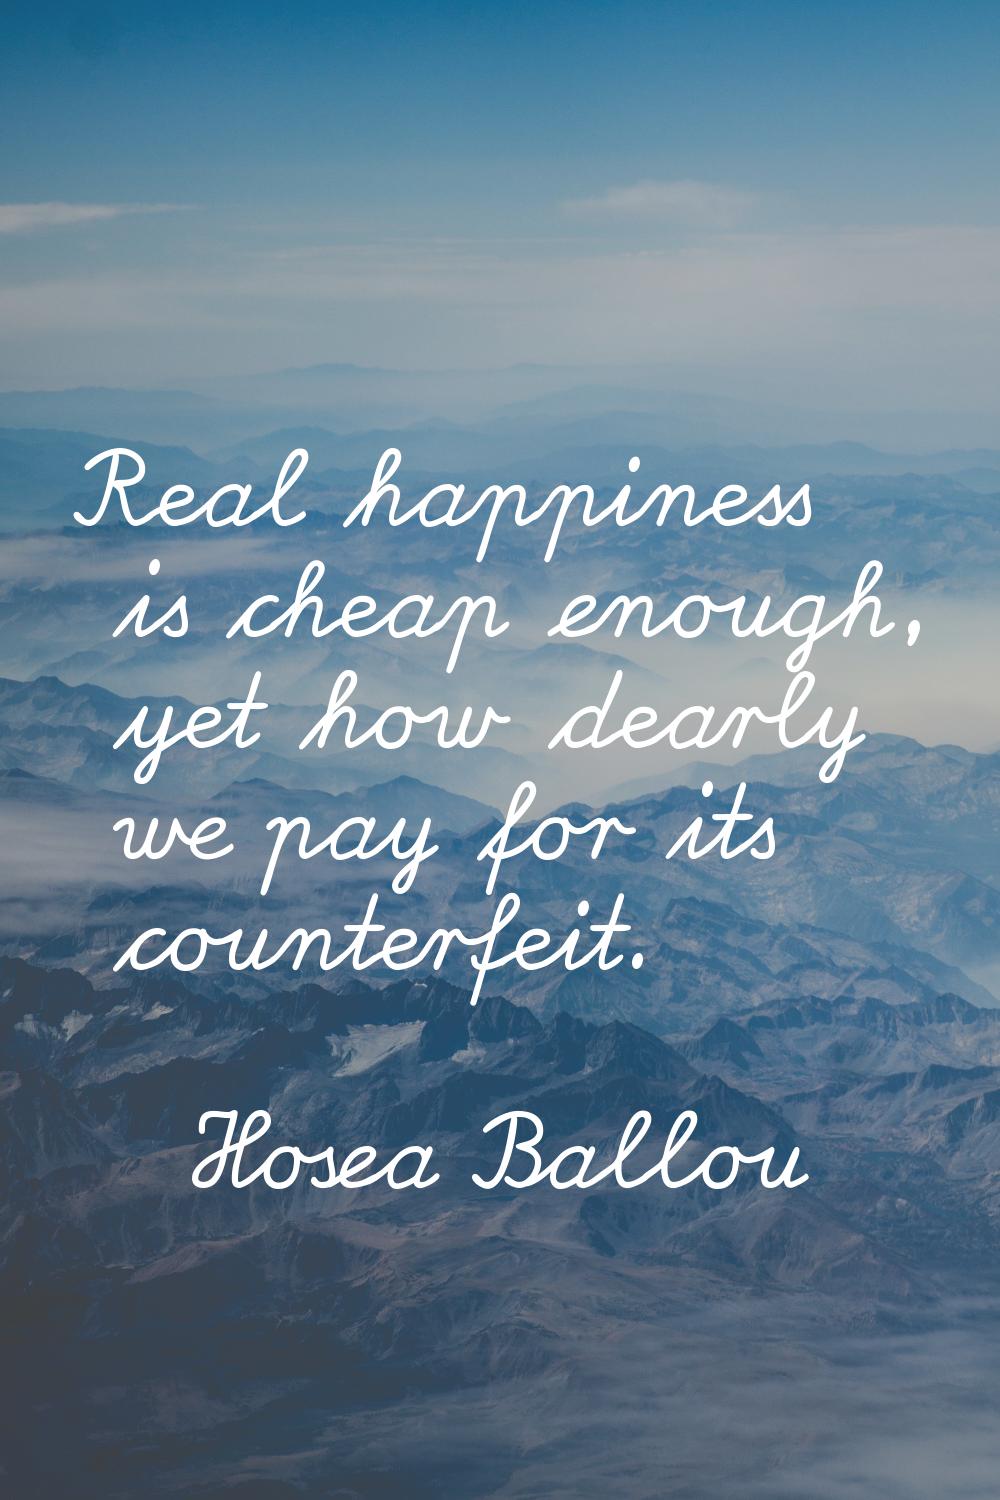 Real happiness is cheap enough, yet how dearly we pay for its counterfeit.